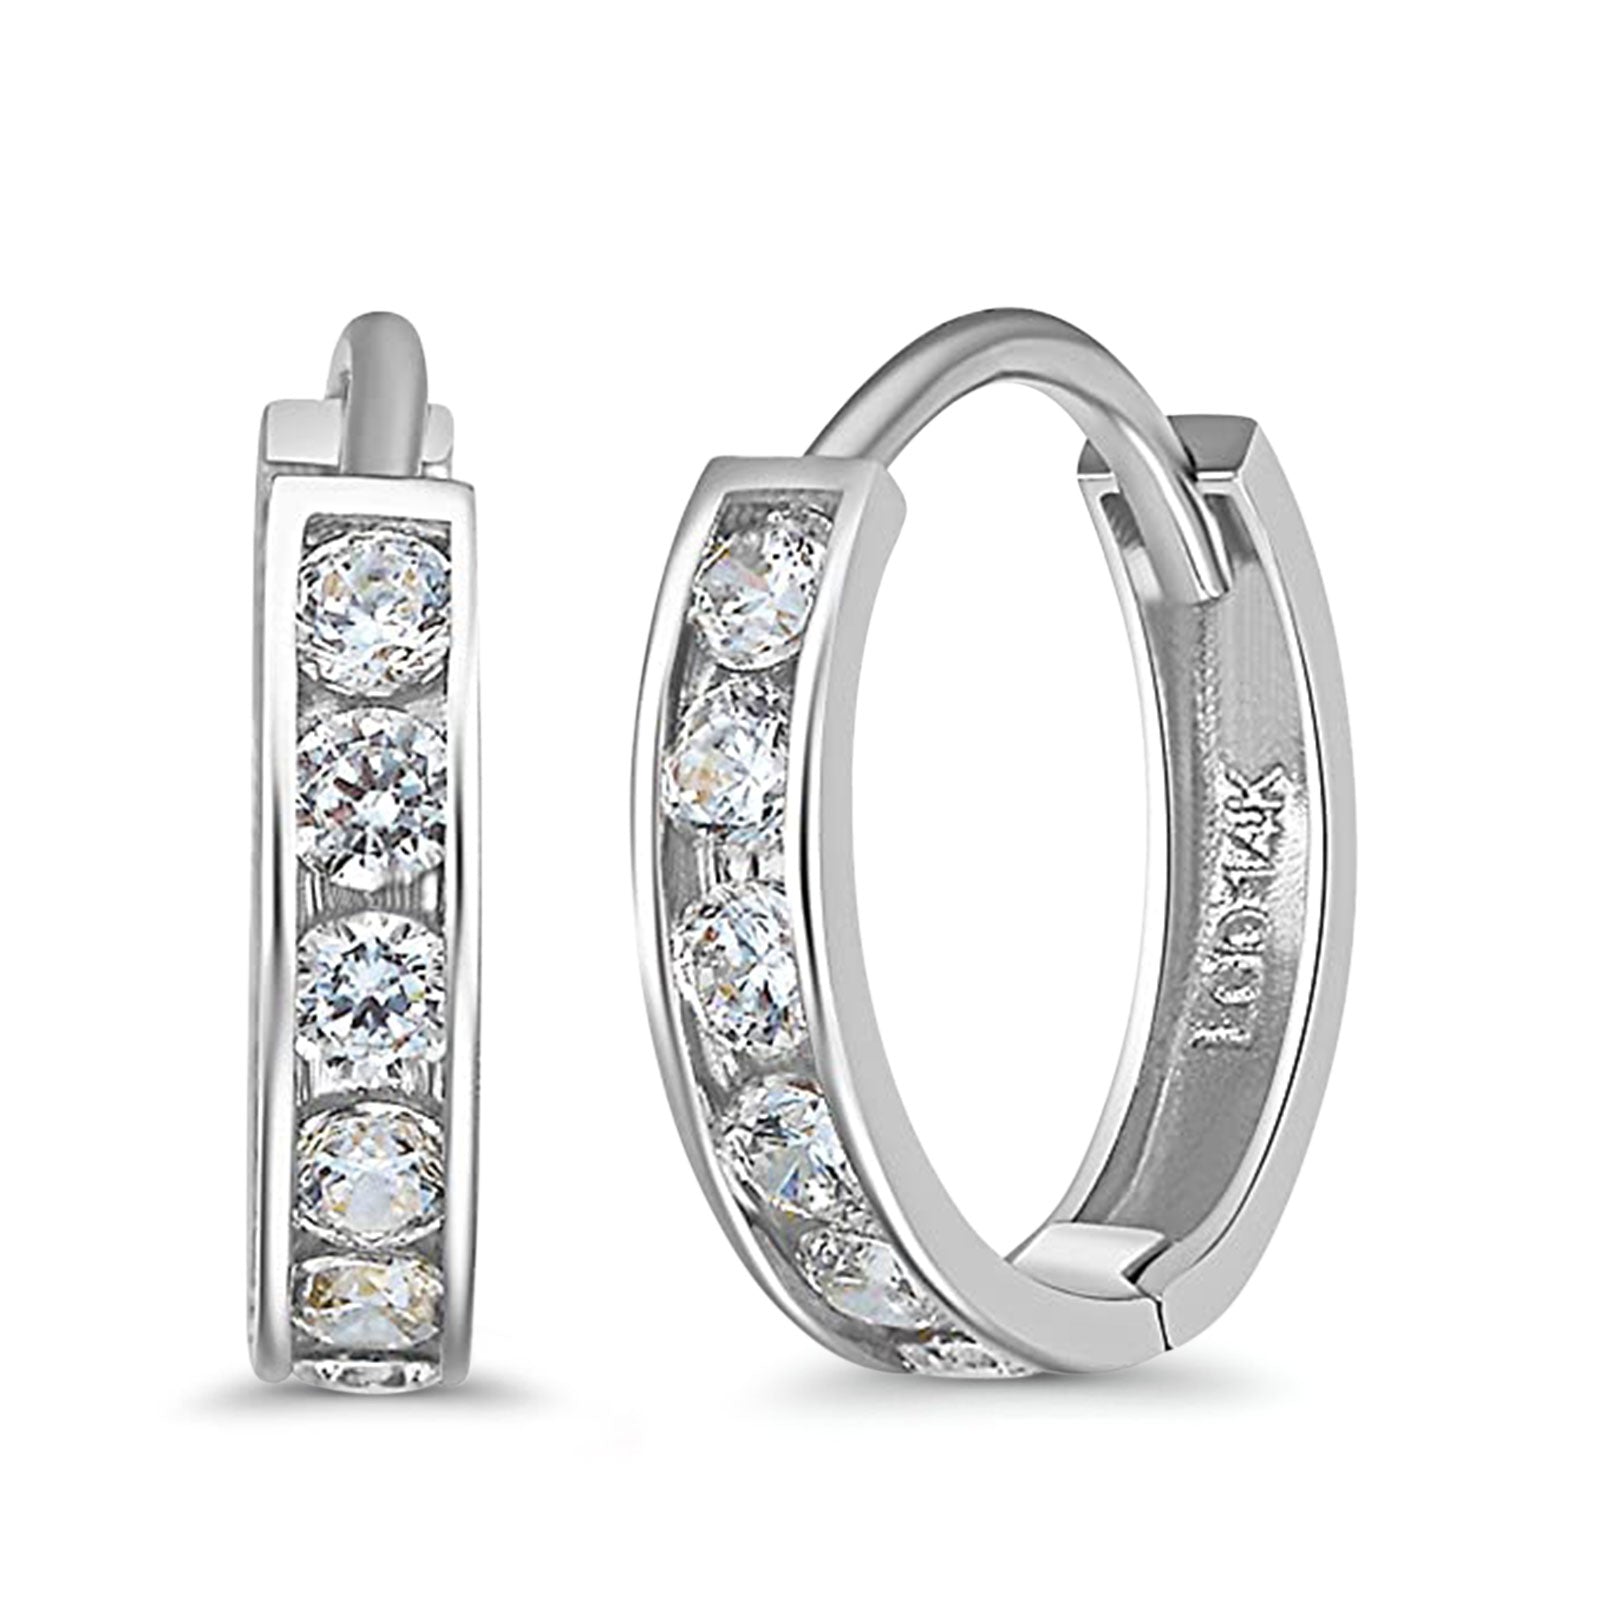 14k White Gold Half Eternity Round CZ Channel Set Hoop Huggie Earrings - 3 Differnet Size Available, Best Birthday Gift for Her